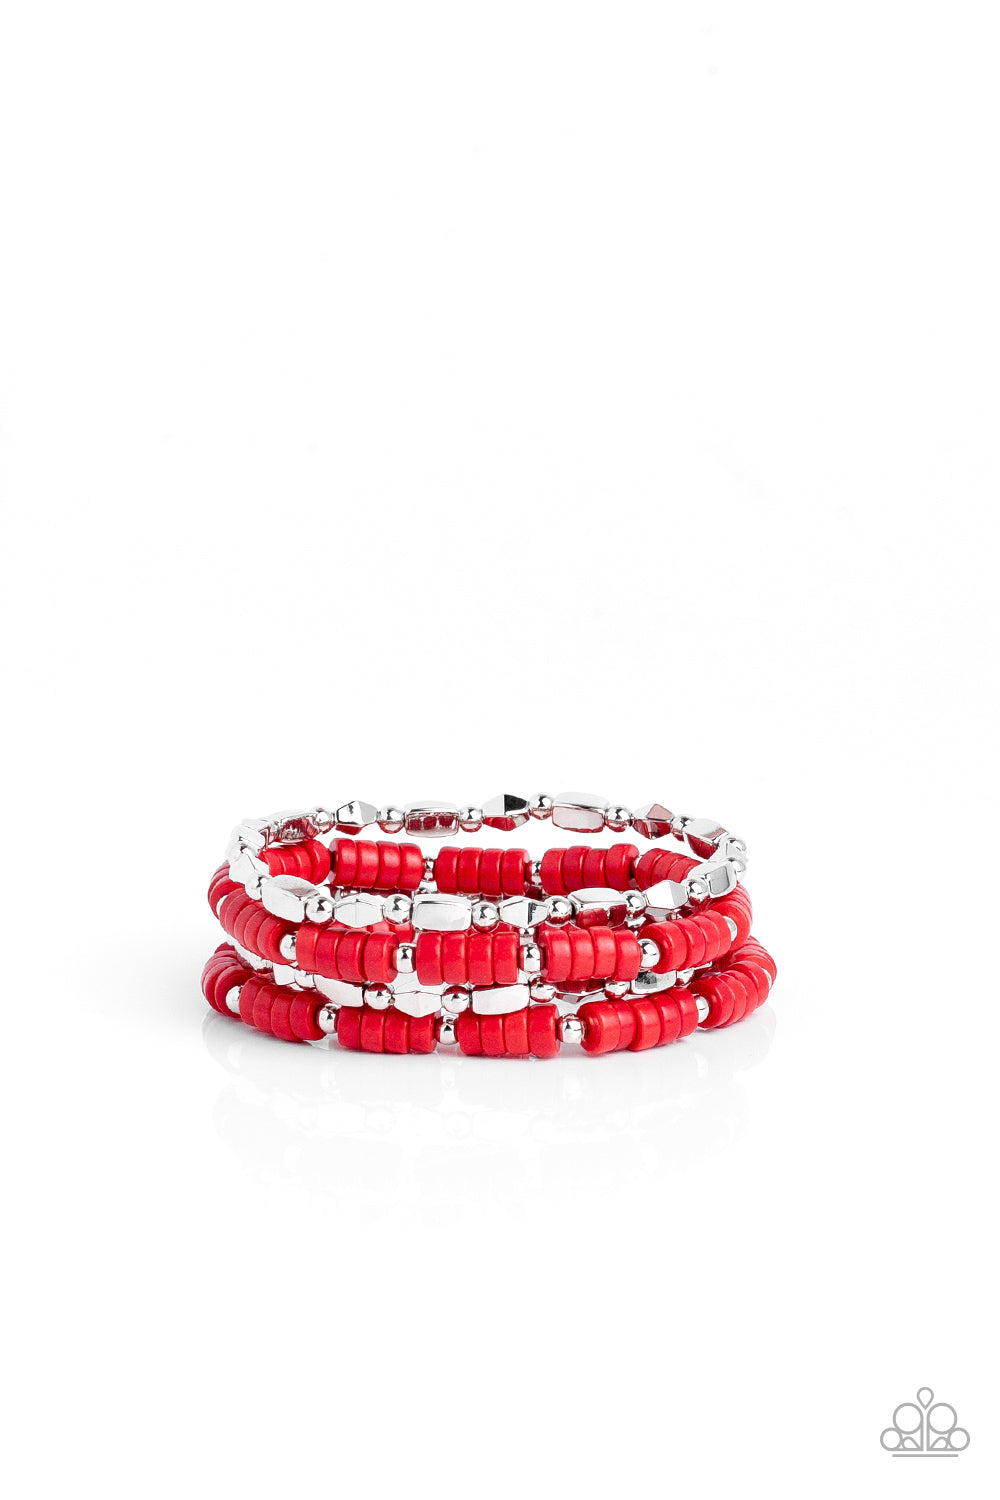 Anasazi Apothecary - Red Stone Discs, Dainty Silver Beads, & Faceted Silver Accent Set of 4 Paparazzi Stretch Bracelets